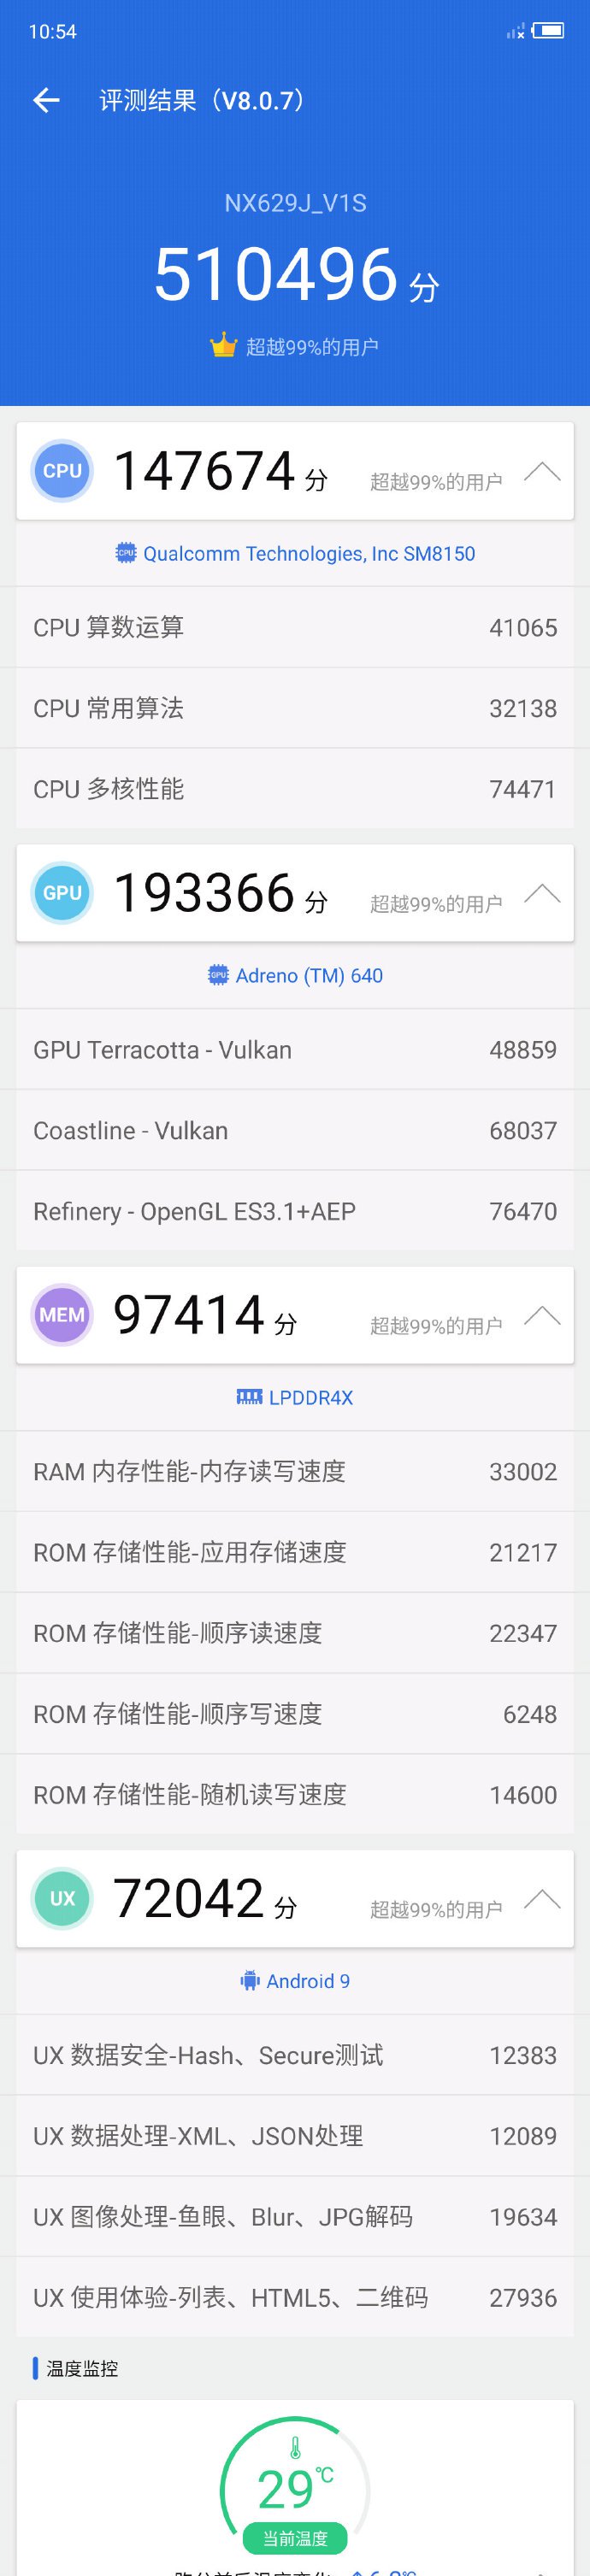 Red Magic 3S records highest AnTuTu score of 510,496 with SD855+ and 12GB RAM